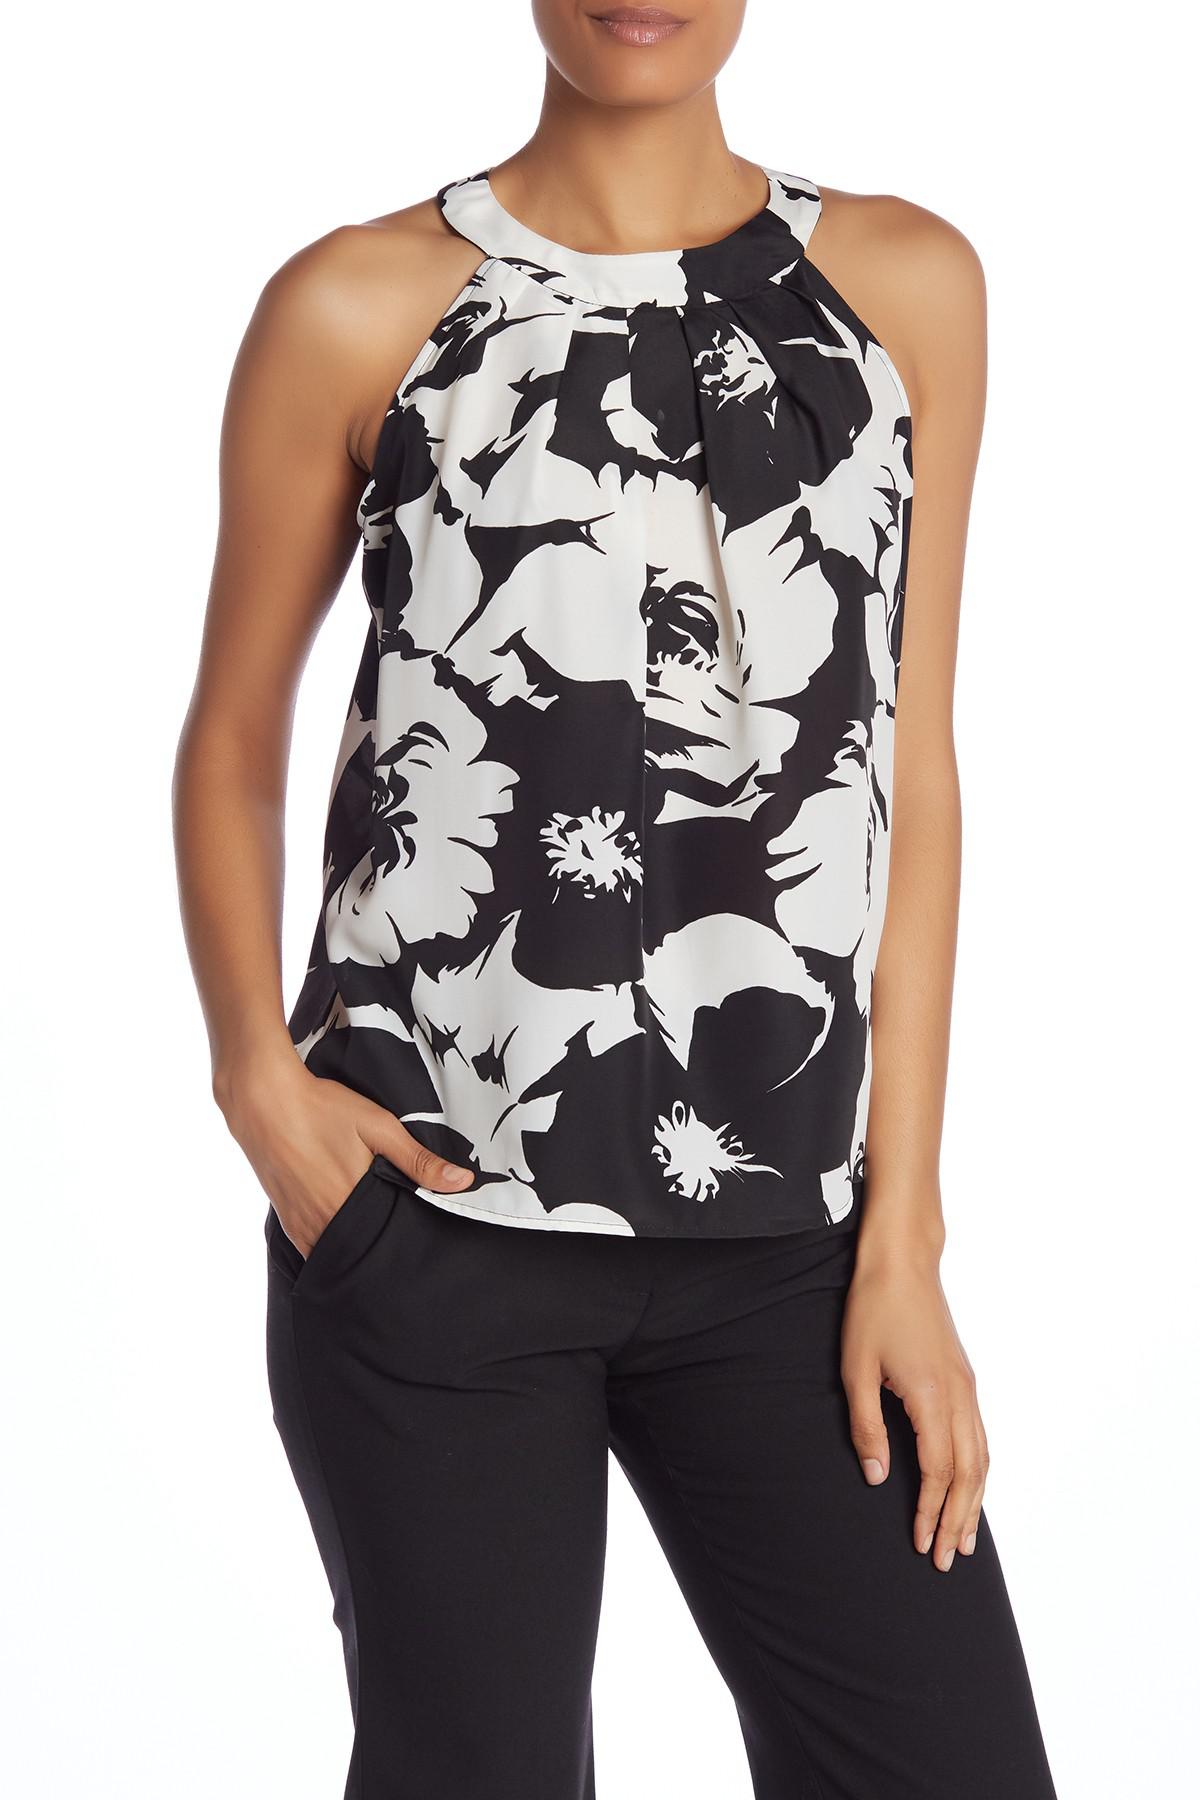 Lyst - Nine West Sleeveless Floral Ruffle Blouse in Black